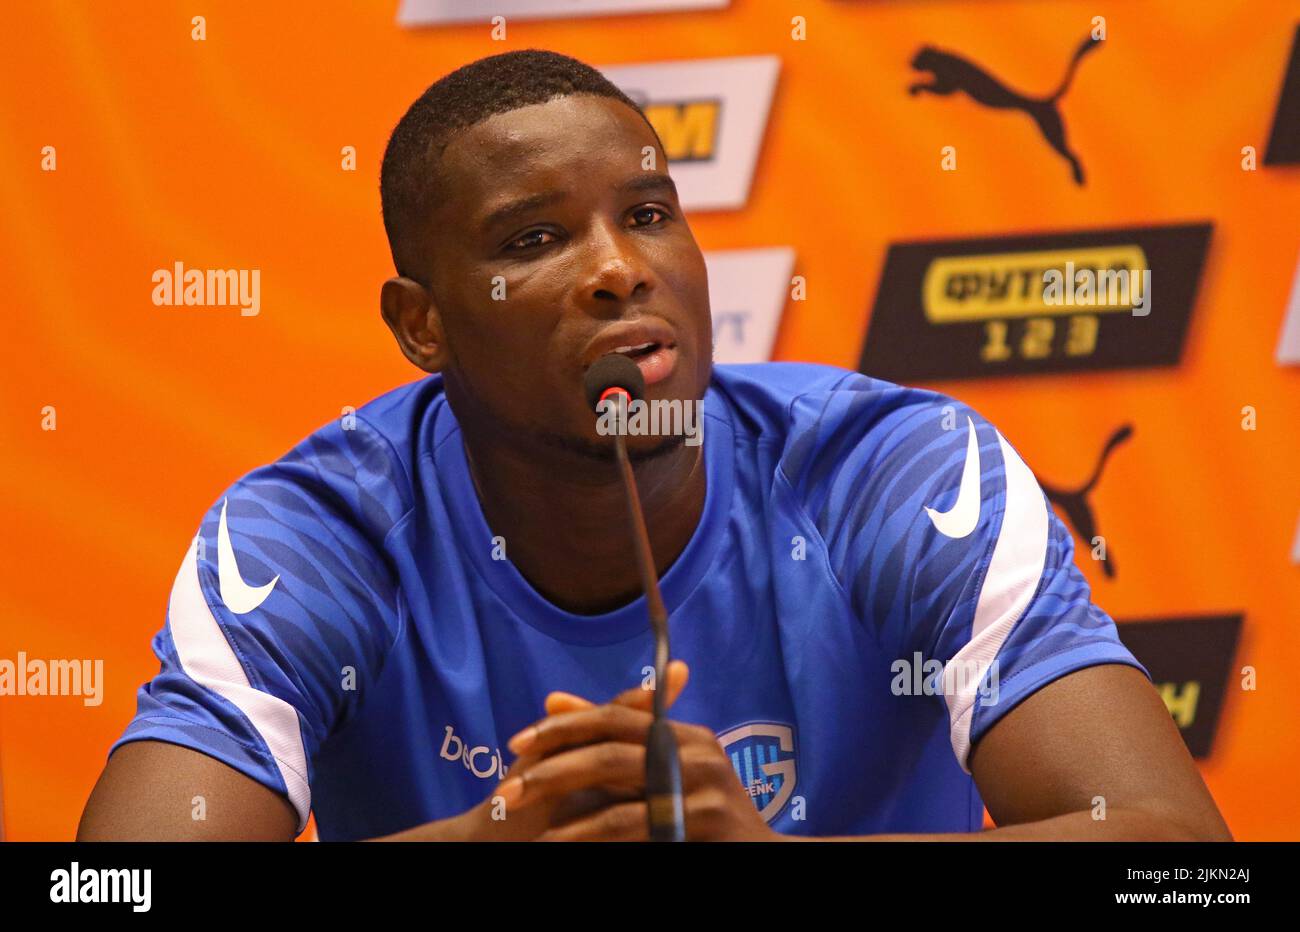 KYIV, UKRAINE - AUGUST 10, 2021: Genk player Paul Onuachu attends the press-conference after the UEFA Champions League third qualifying round game against Shakhtar Donetsk in Kyiv Stock Photo